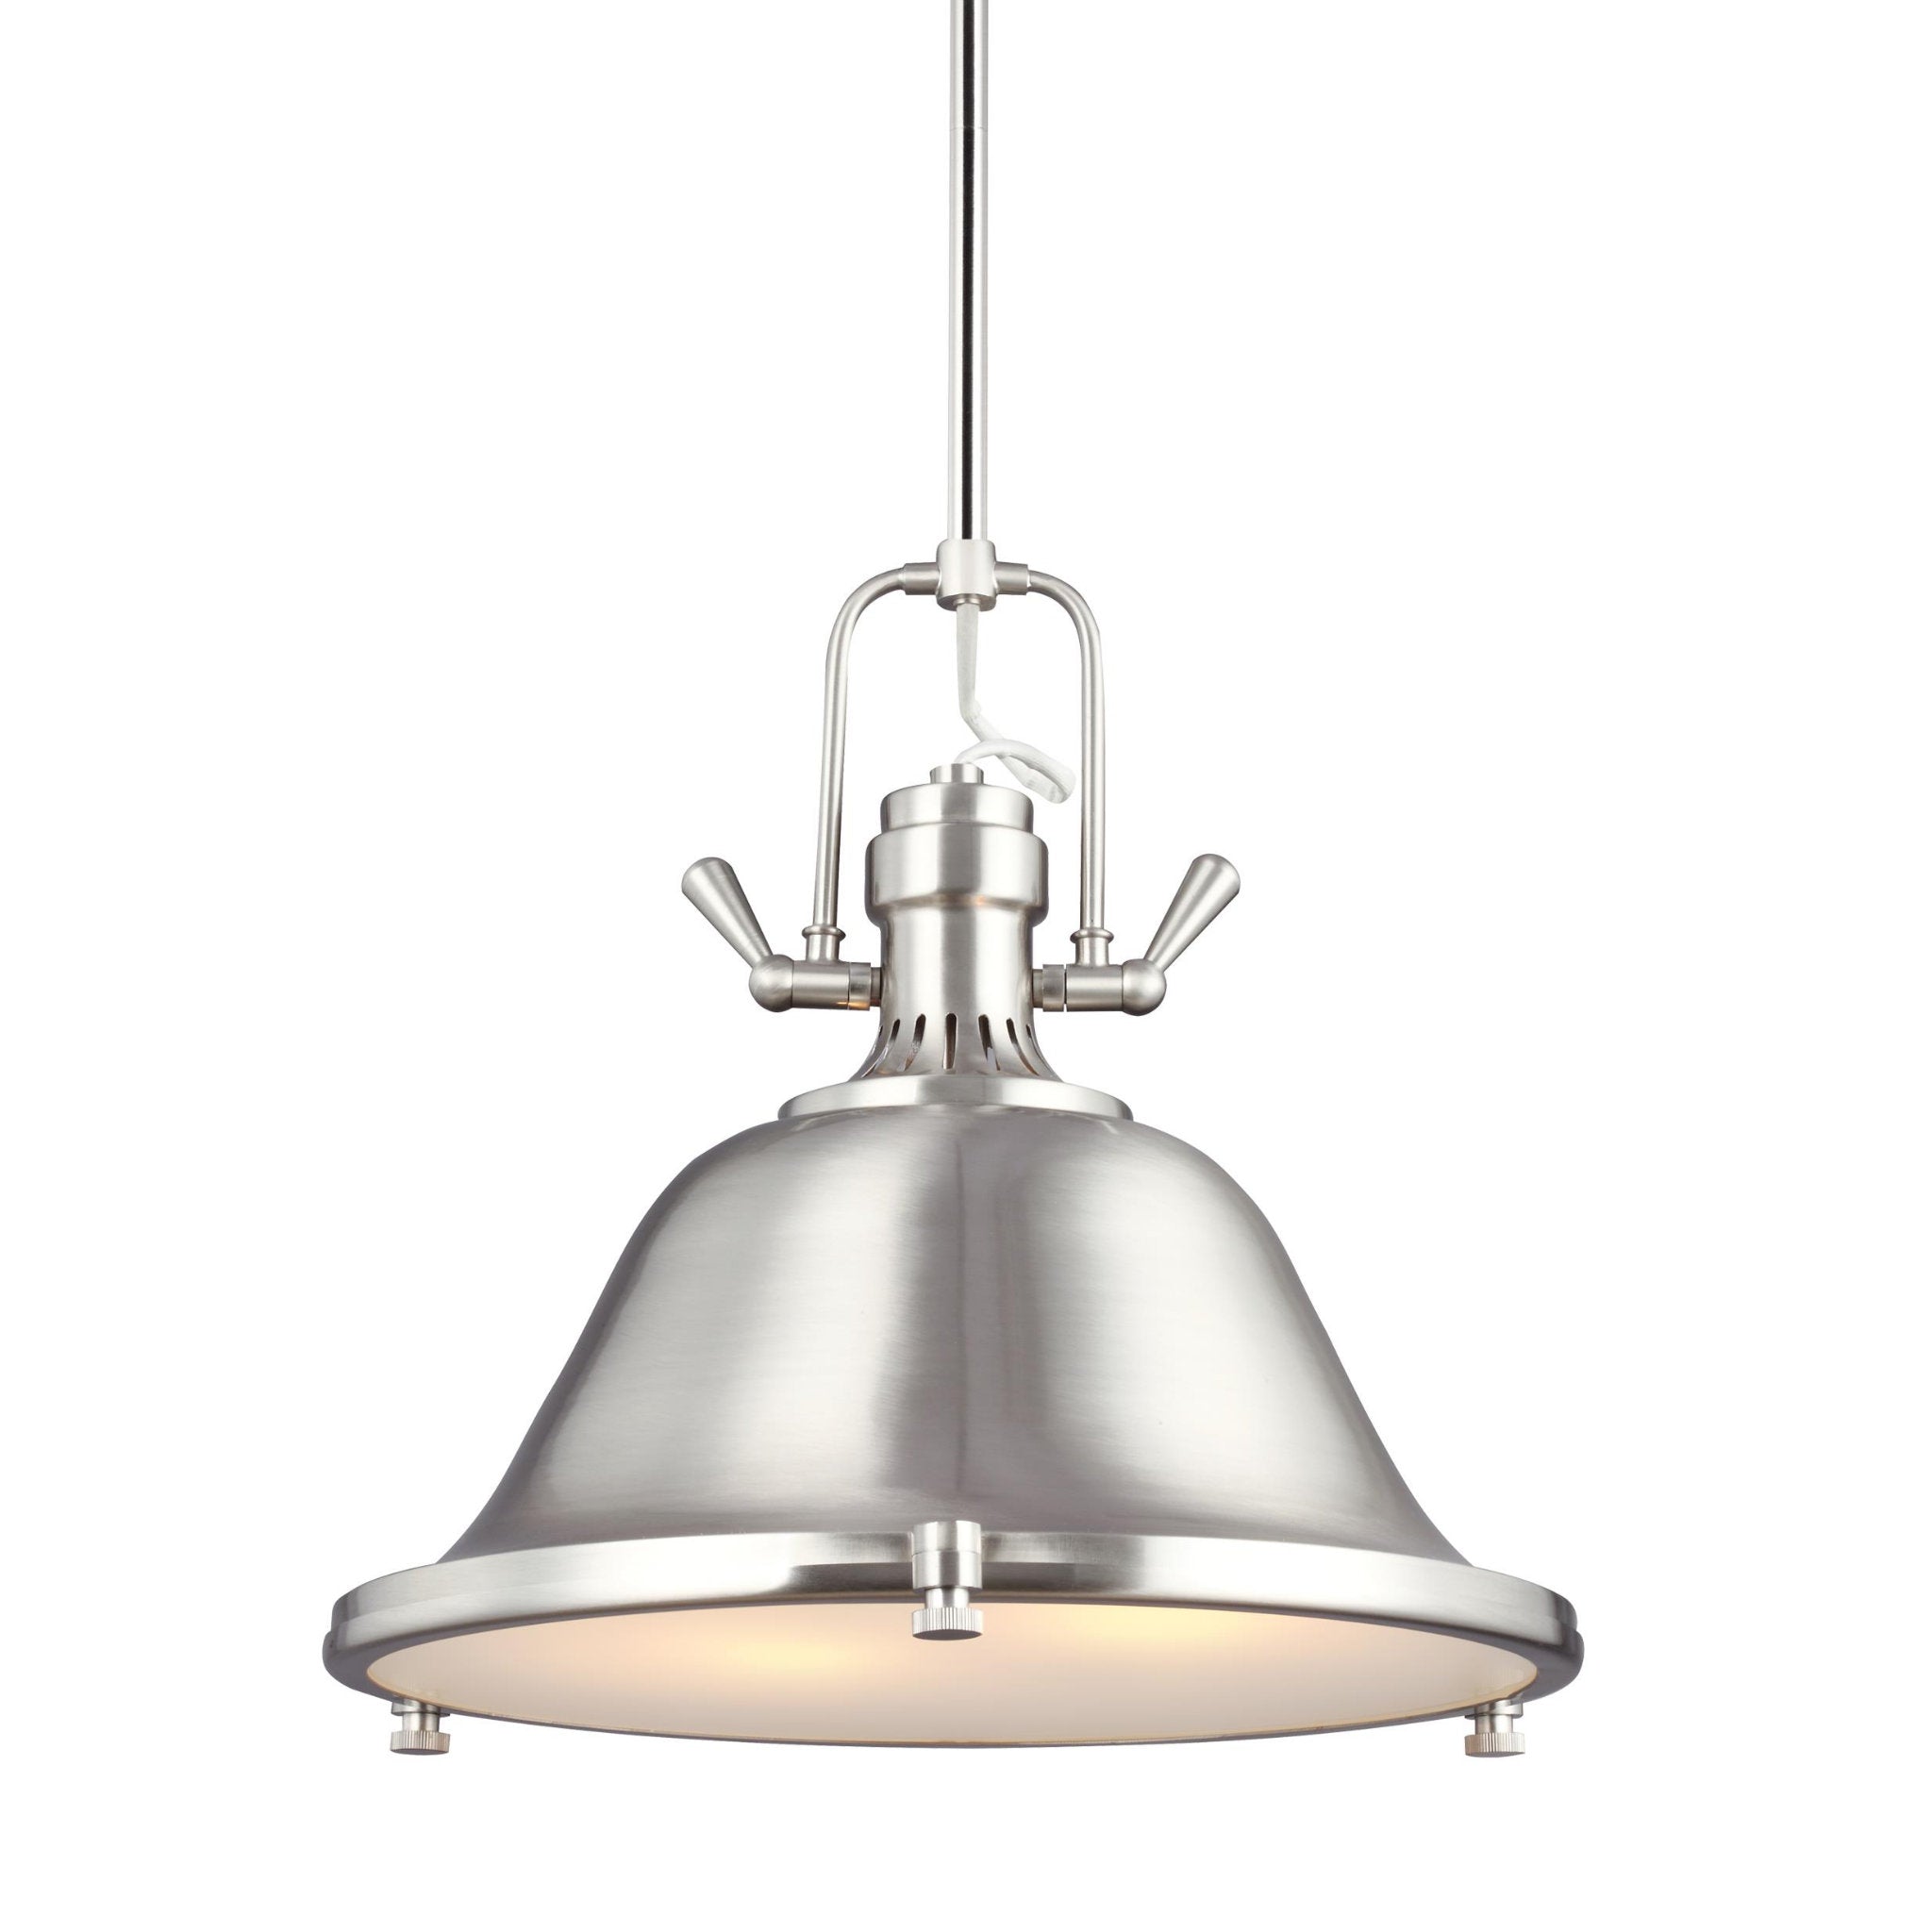 Stone Street Two Light Pendant Contemporary 15.5" Height Steel Round Satin Etched Shade in Brushed Nickel